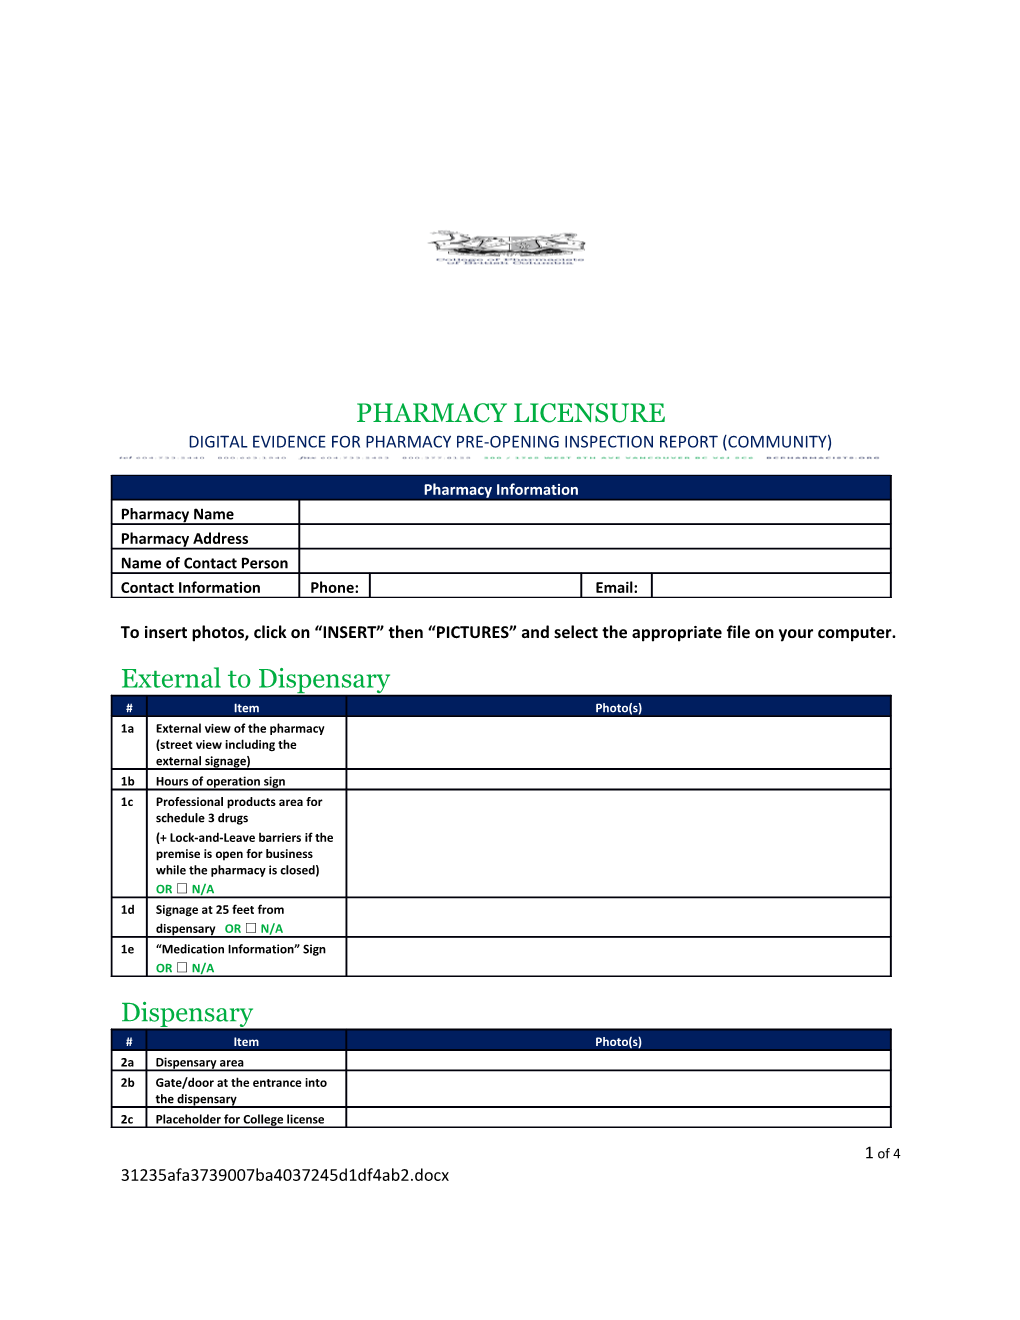 Digital Evidence for Pharmacy Pre-Opening Inspection Report (Community)